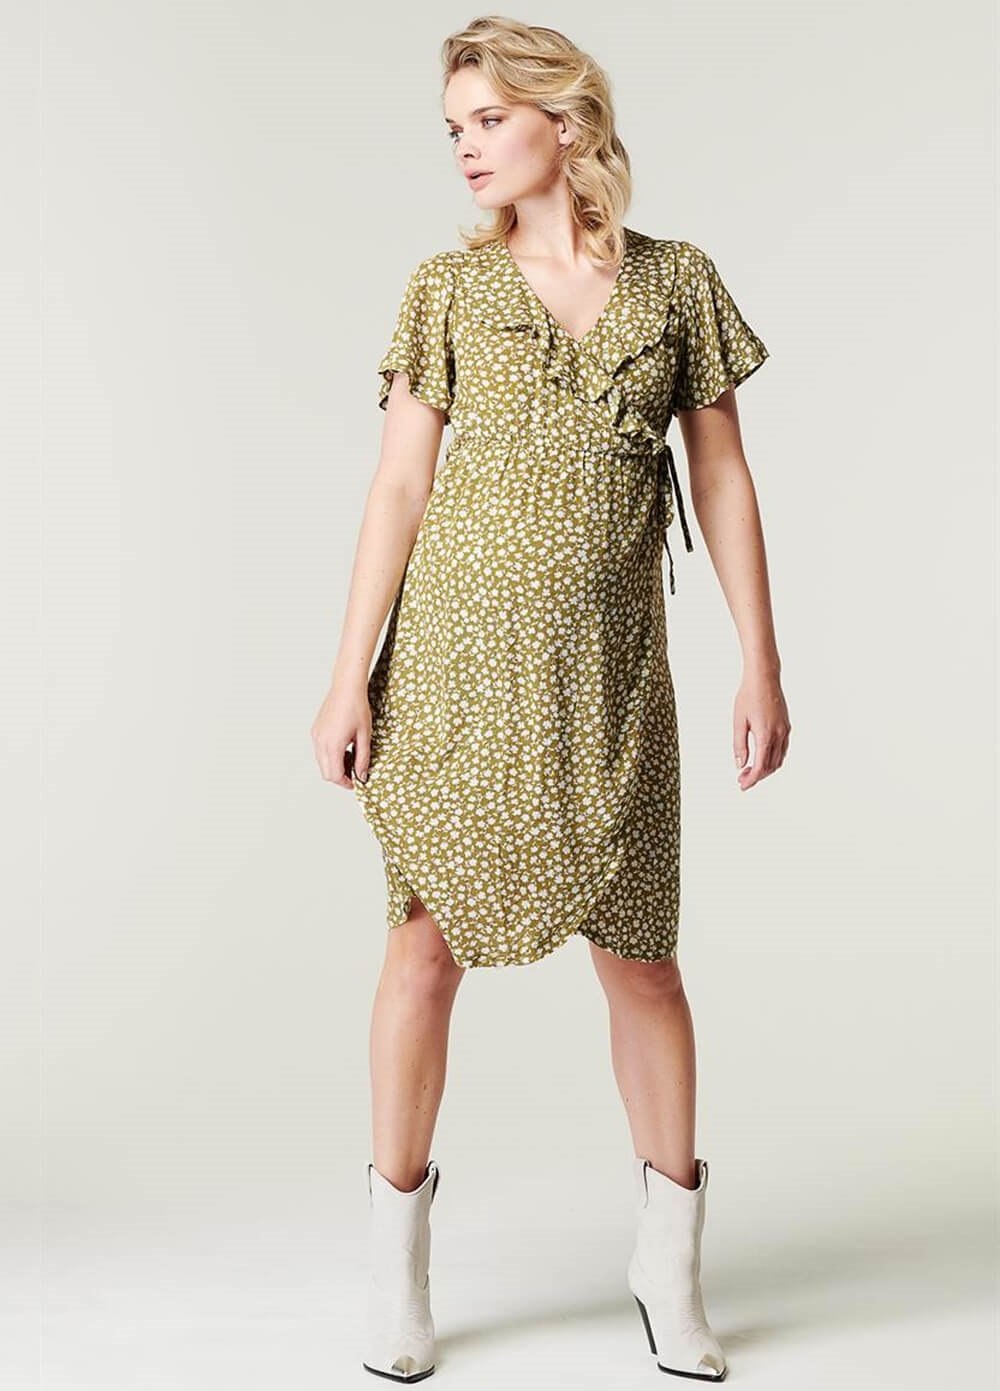 Supermom - Olive Floral Maternity Nursing Wrap Dress | Queen Bee